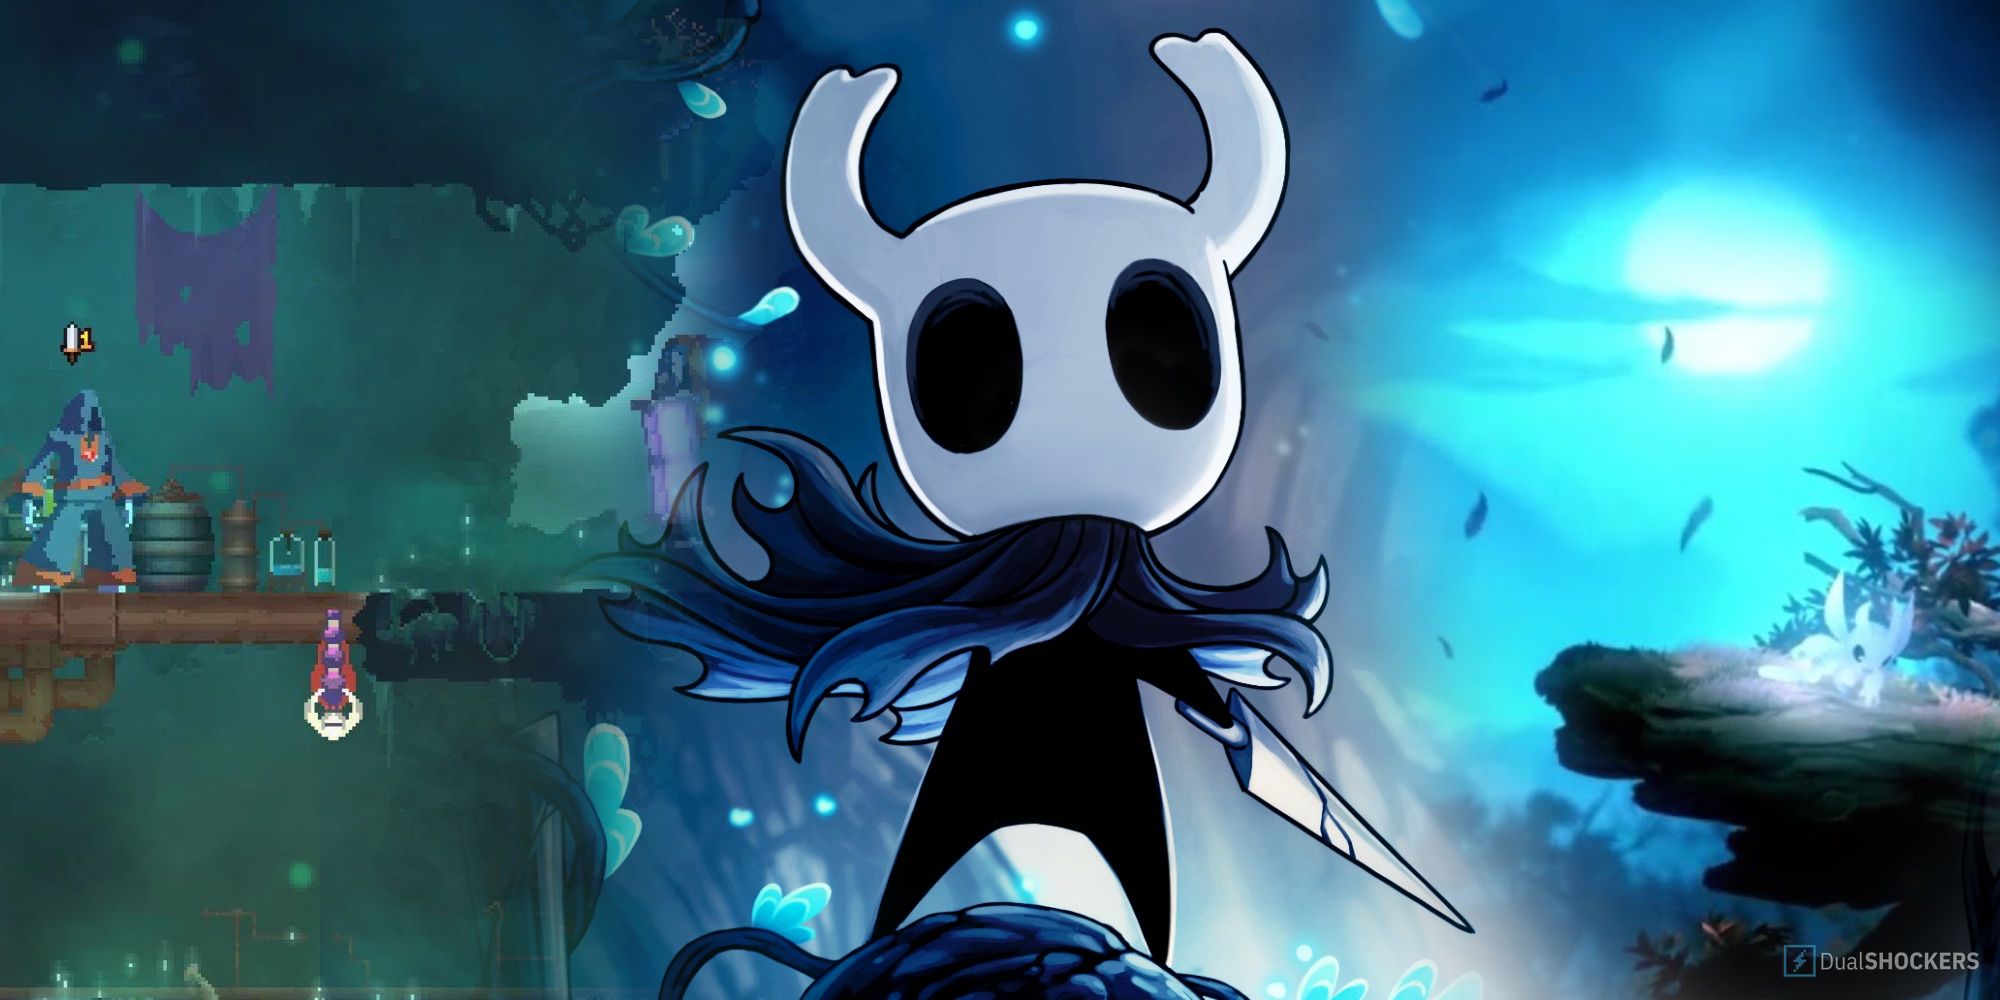 Games like Hollow Knight, Dead Cells and ori